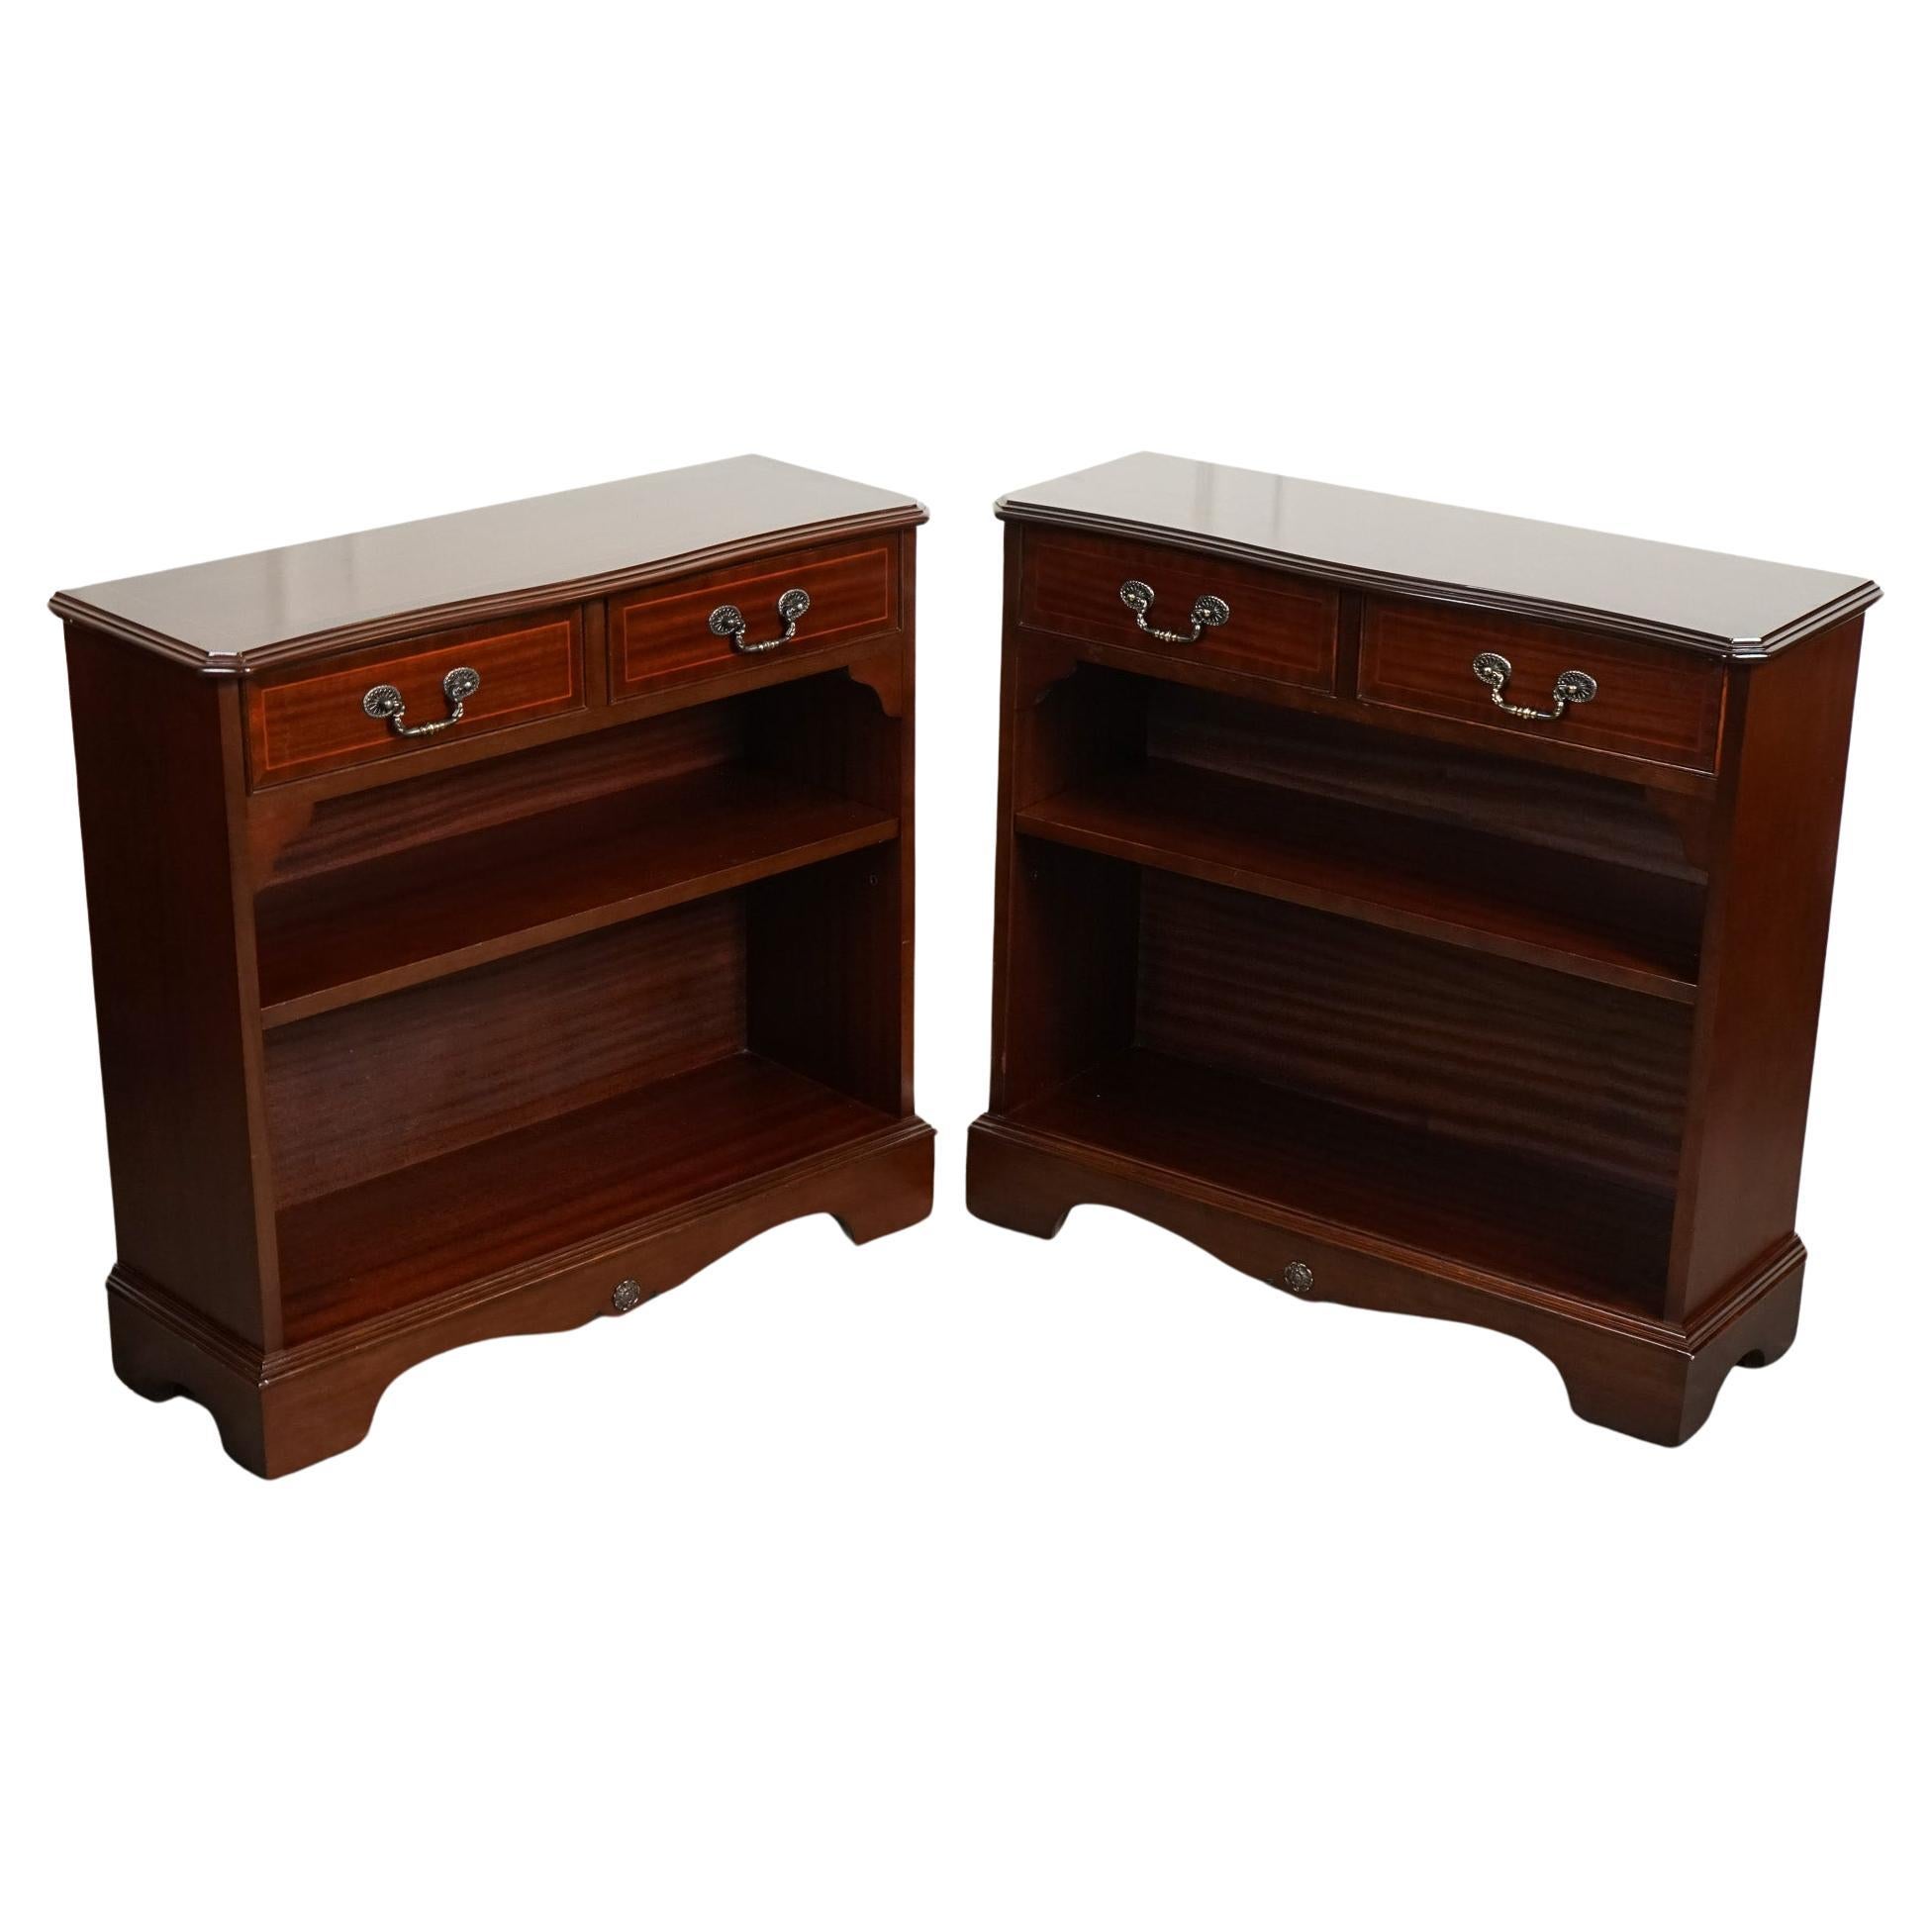 PAIR MAHOGANY OPEN DWARF LIBRARY BOOKCASES ADJUSTABLE SHELVES j1 For Sale